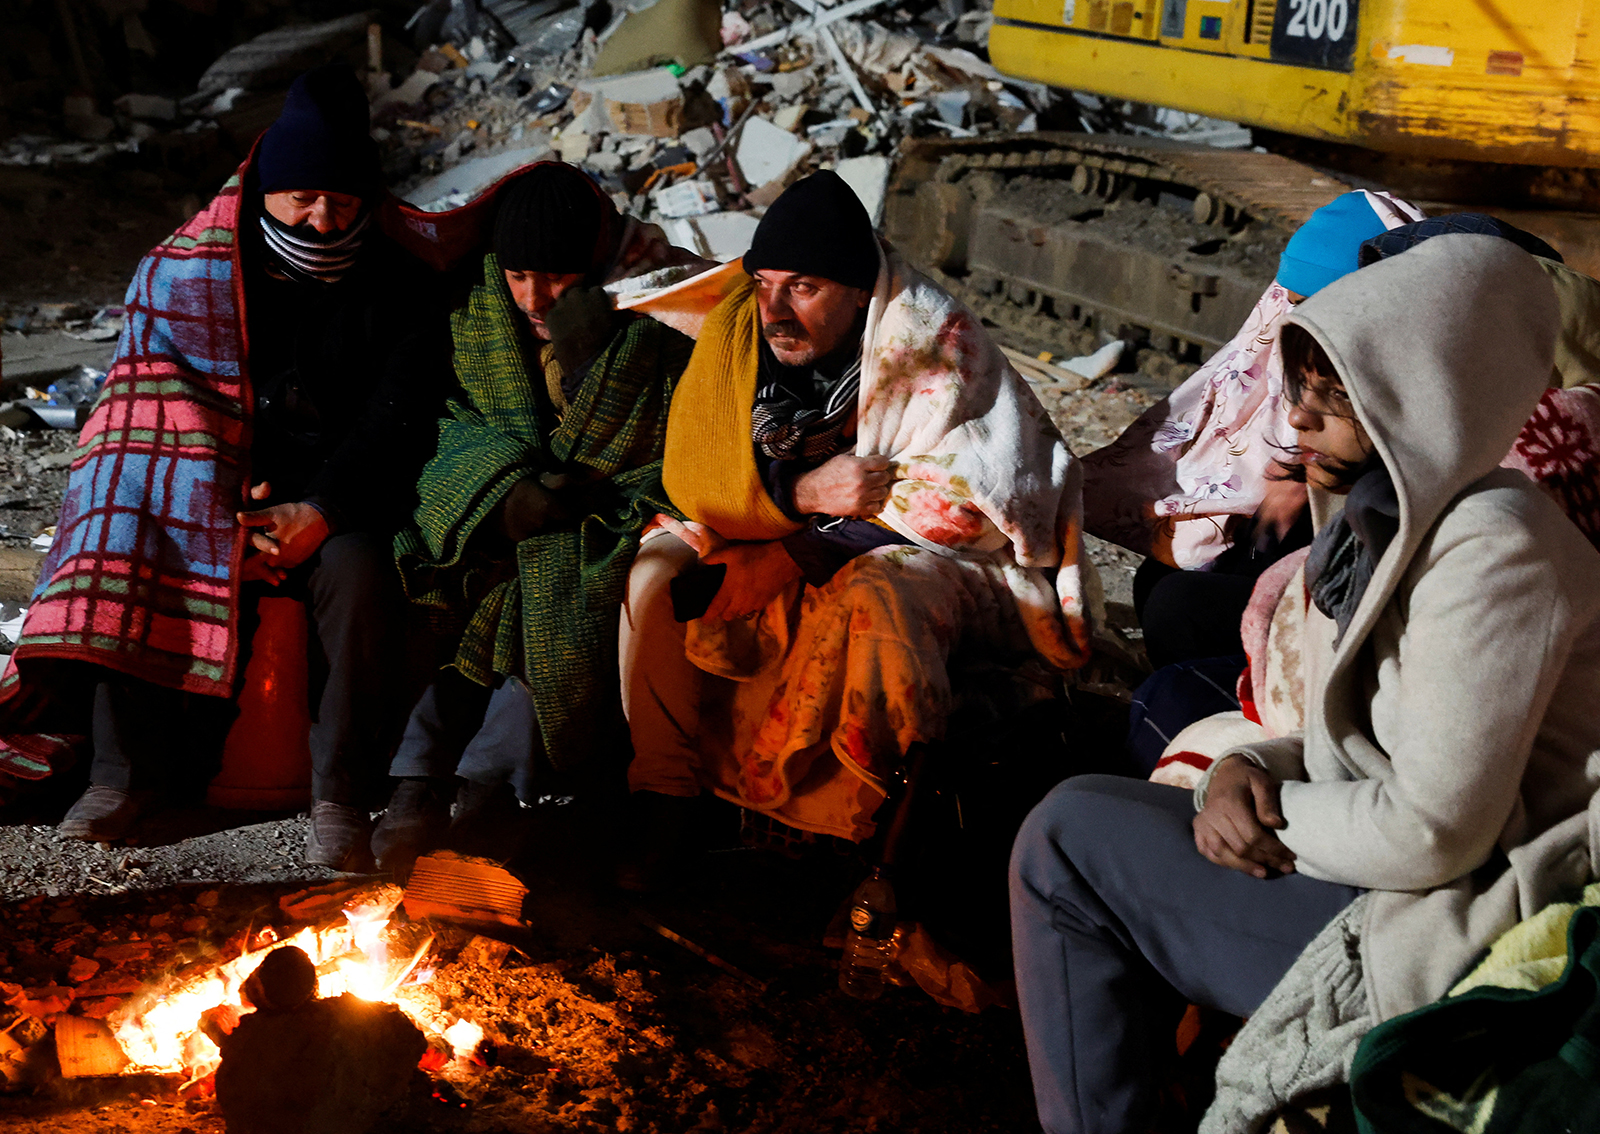 People rescued by the German ISAR rescue team, wait by a fire during a rescue operation in Kirikhan, Turkey on February 10. 